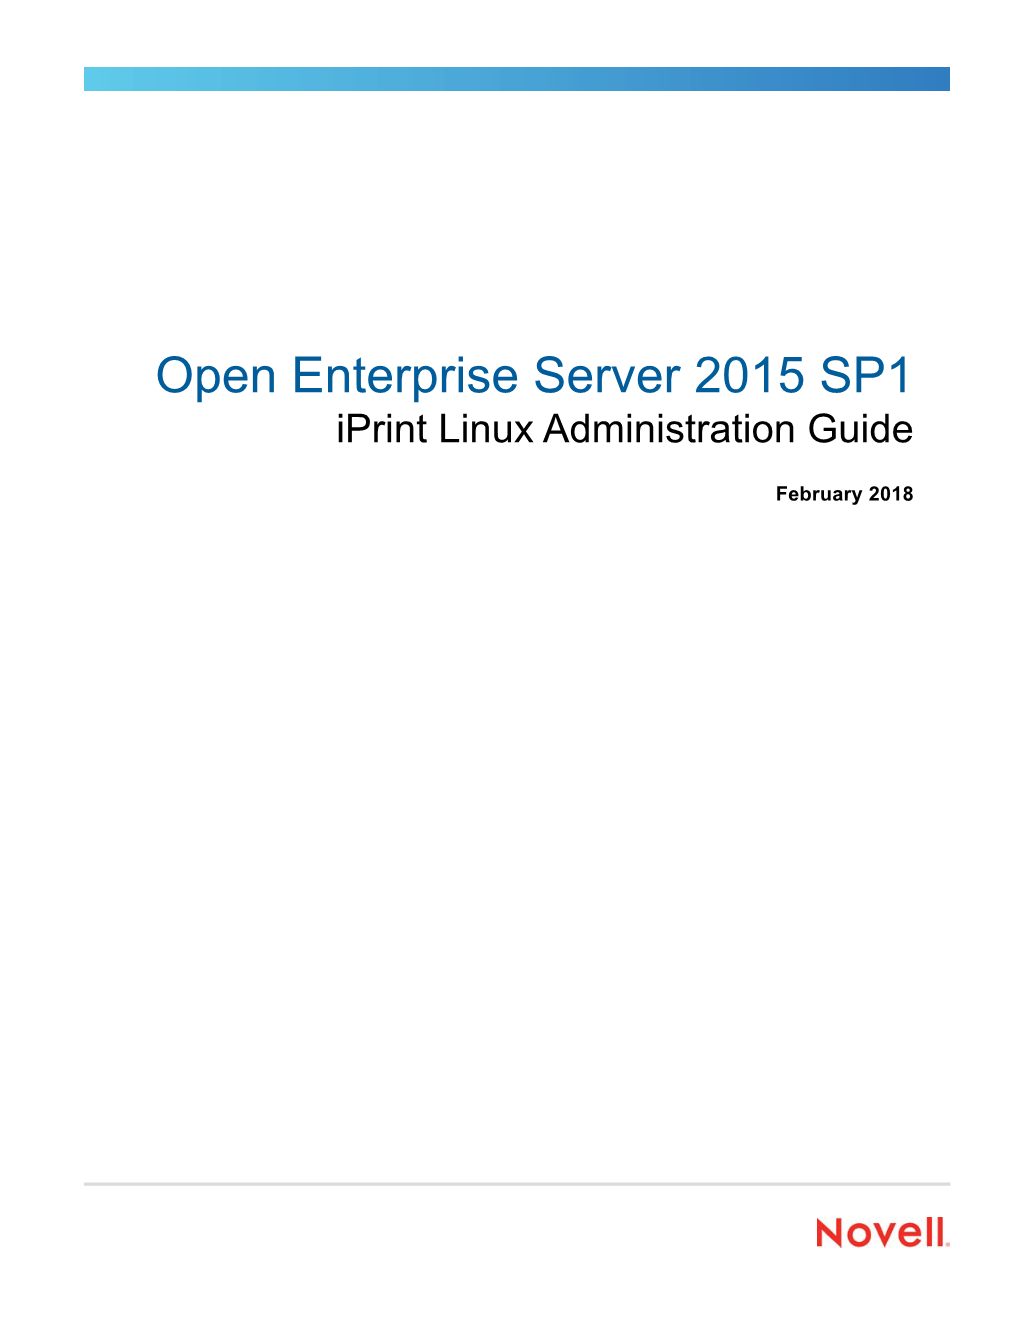 OES 2015 SP1: Iprint Linux Administration Guide